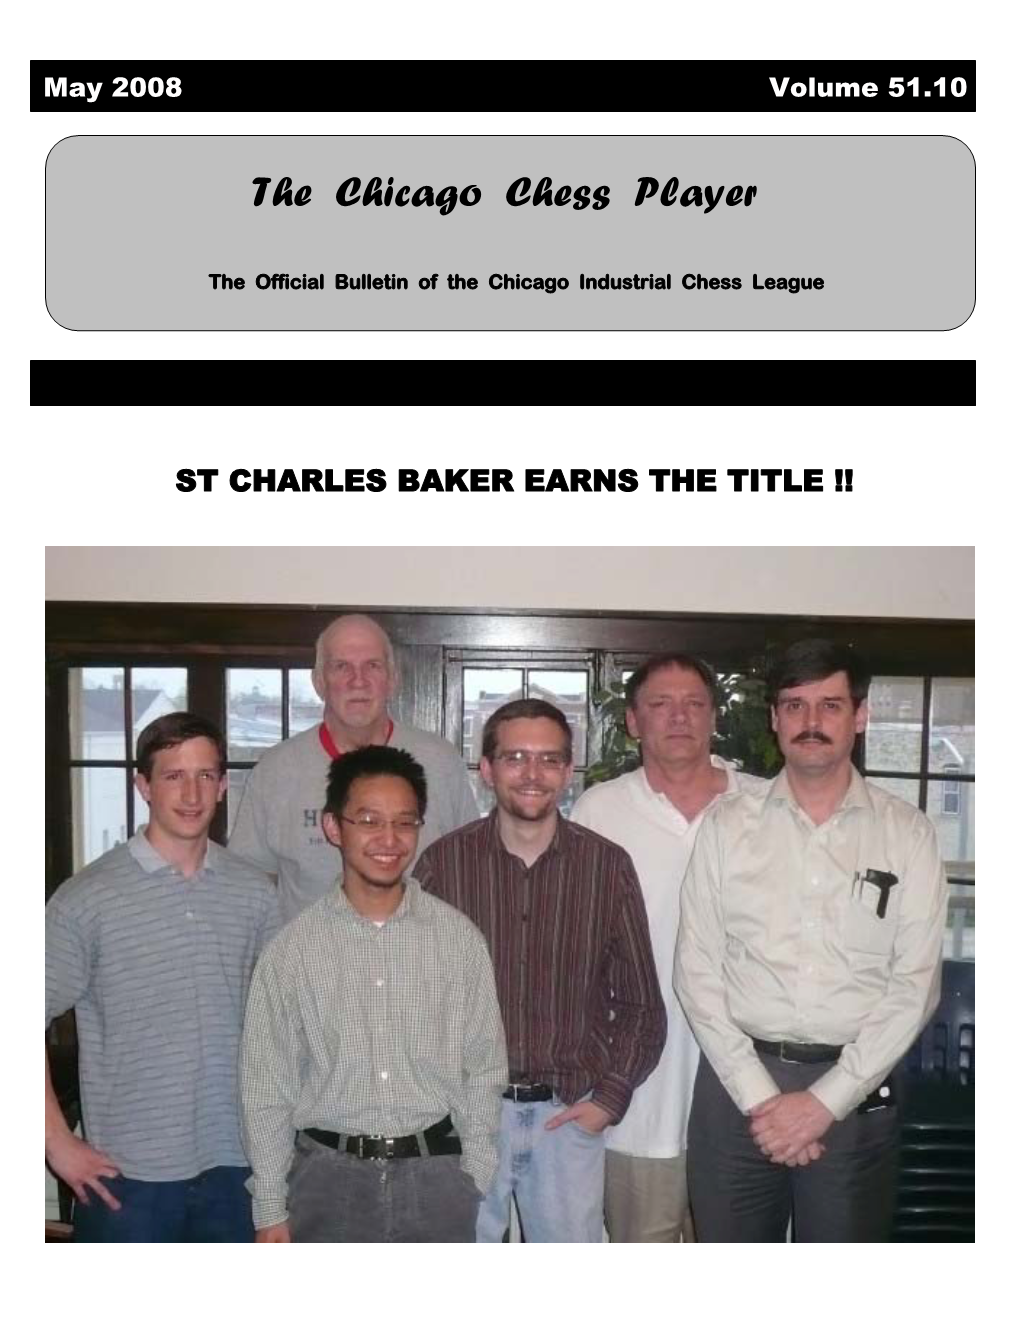 The Chicago Chess Player